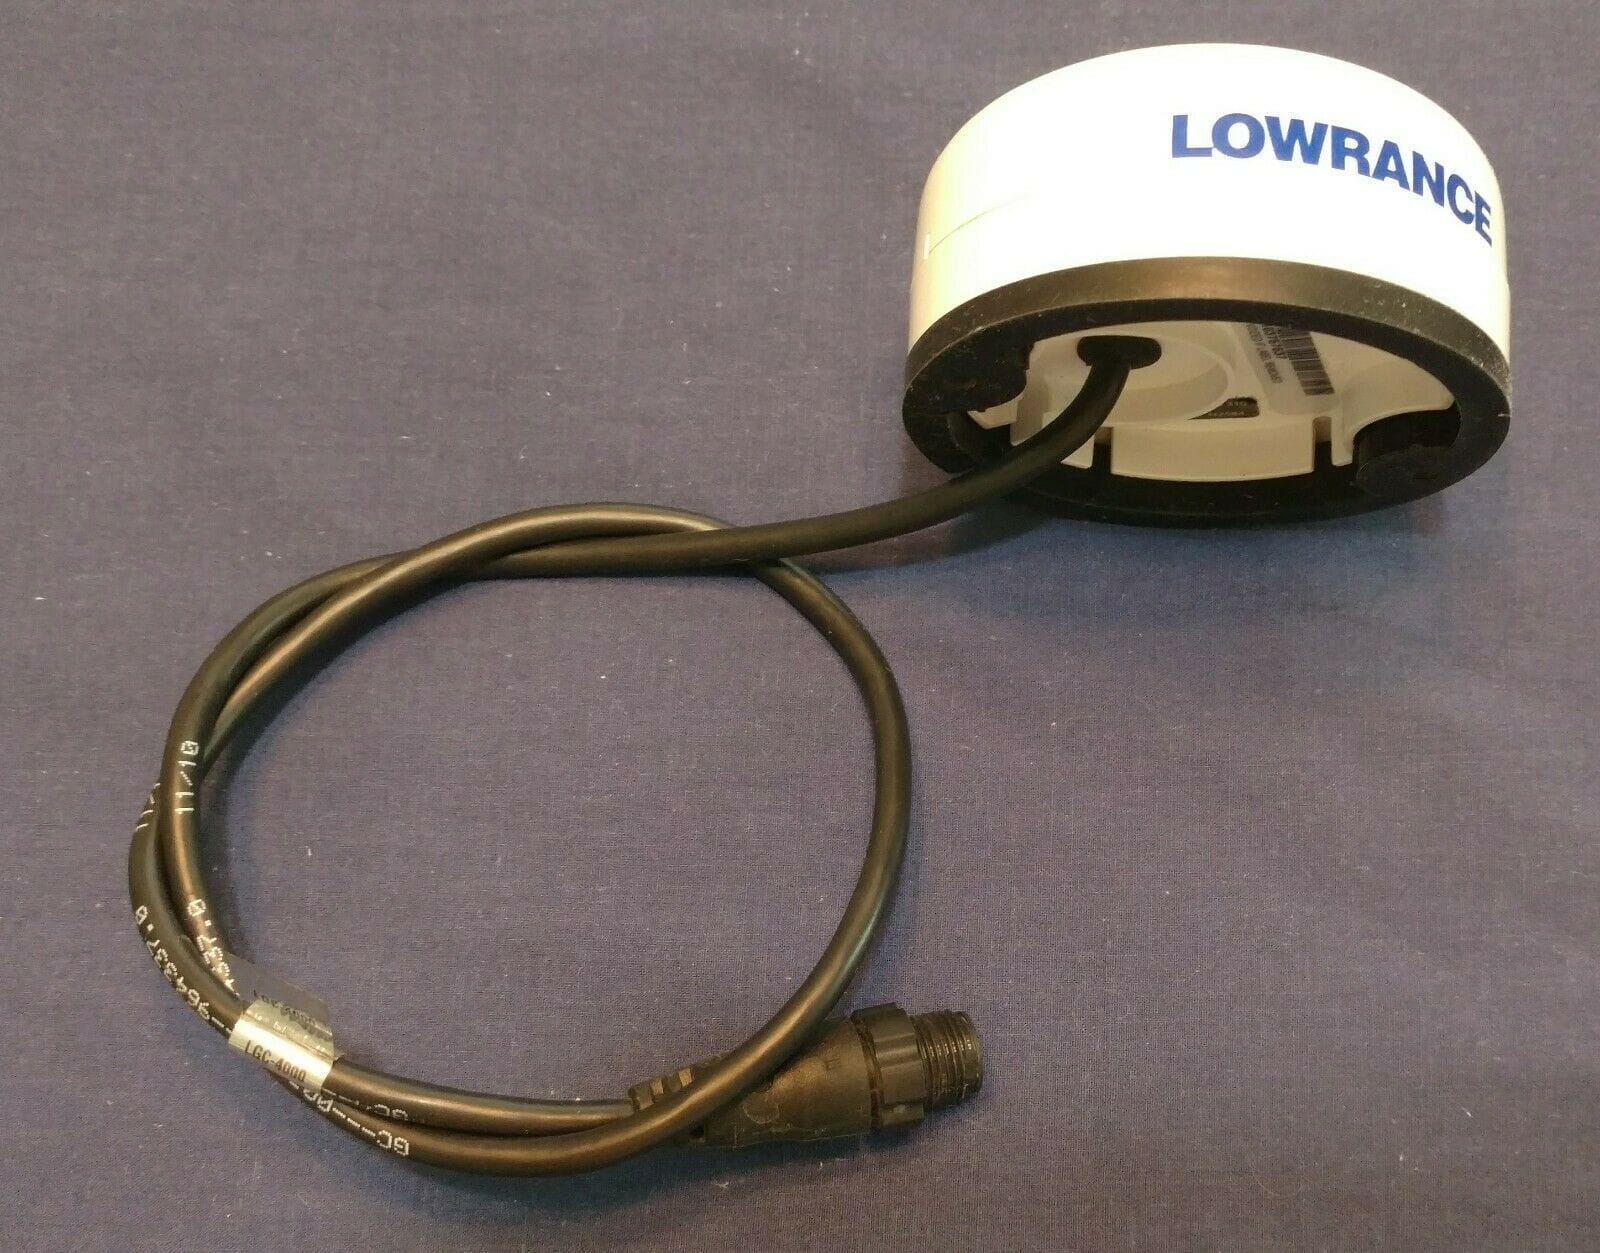 For Sale - Lowrance GPS Module Antenna LGC 4000 16-channel NMEA 2000 GPS  Antenna - The Hull Truth - Boating and Fishing Forum